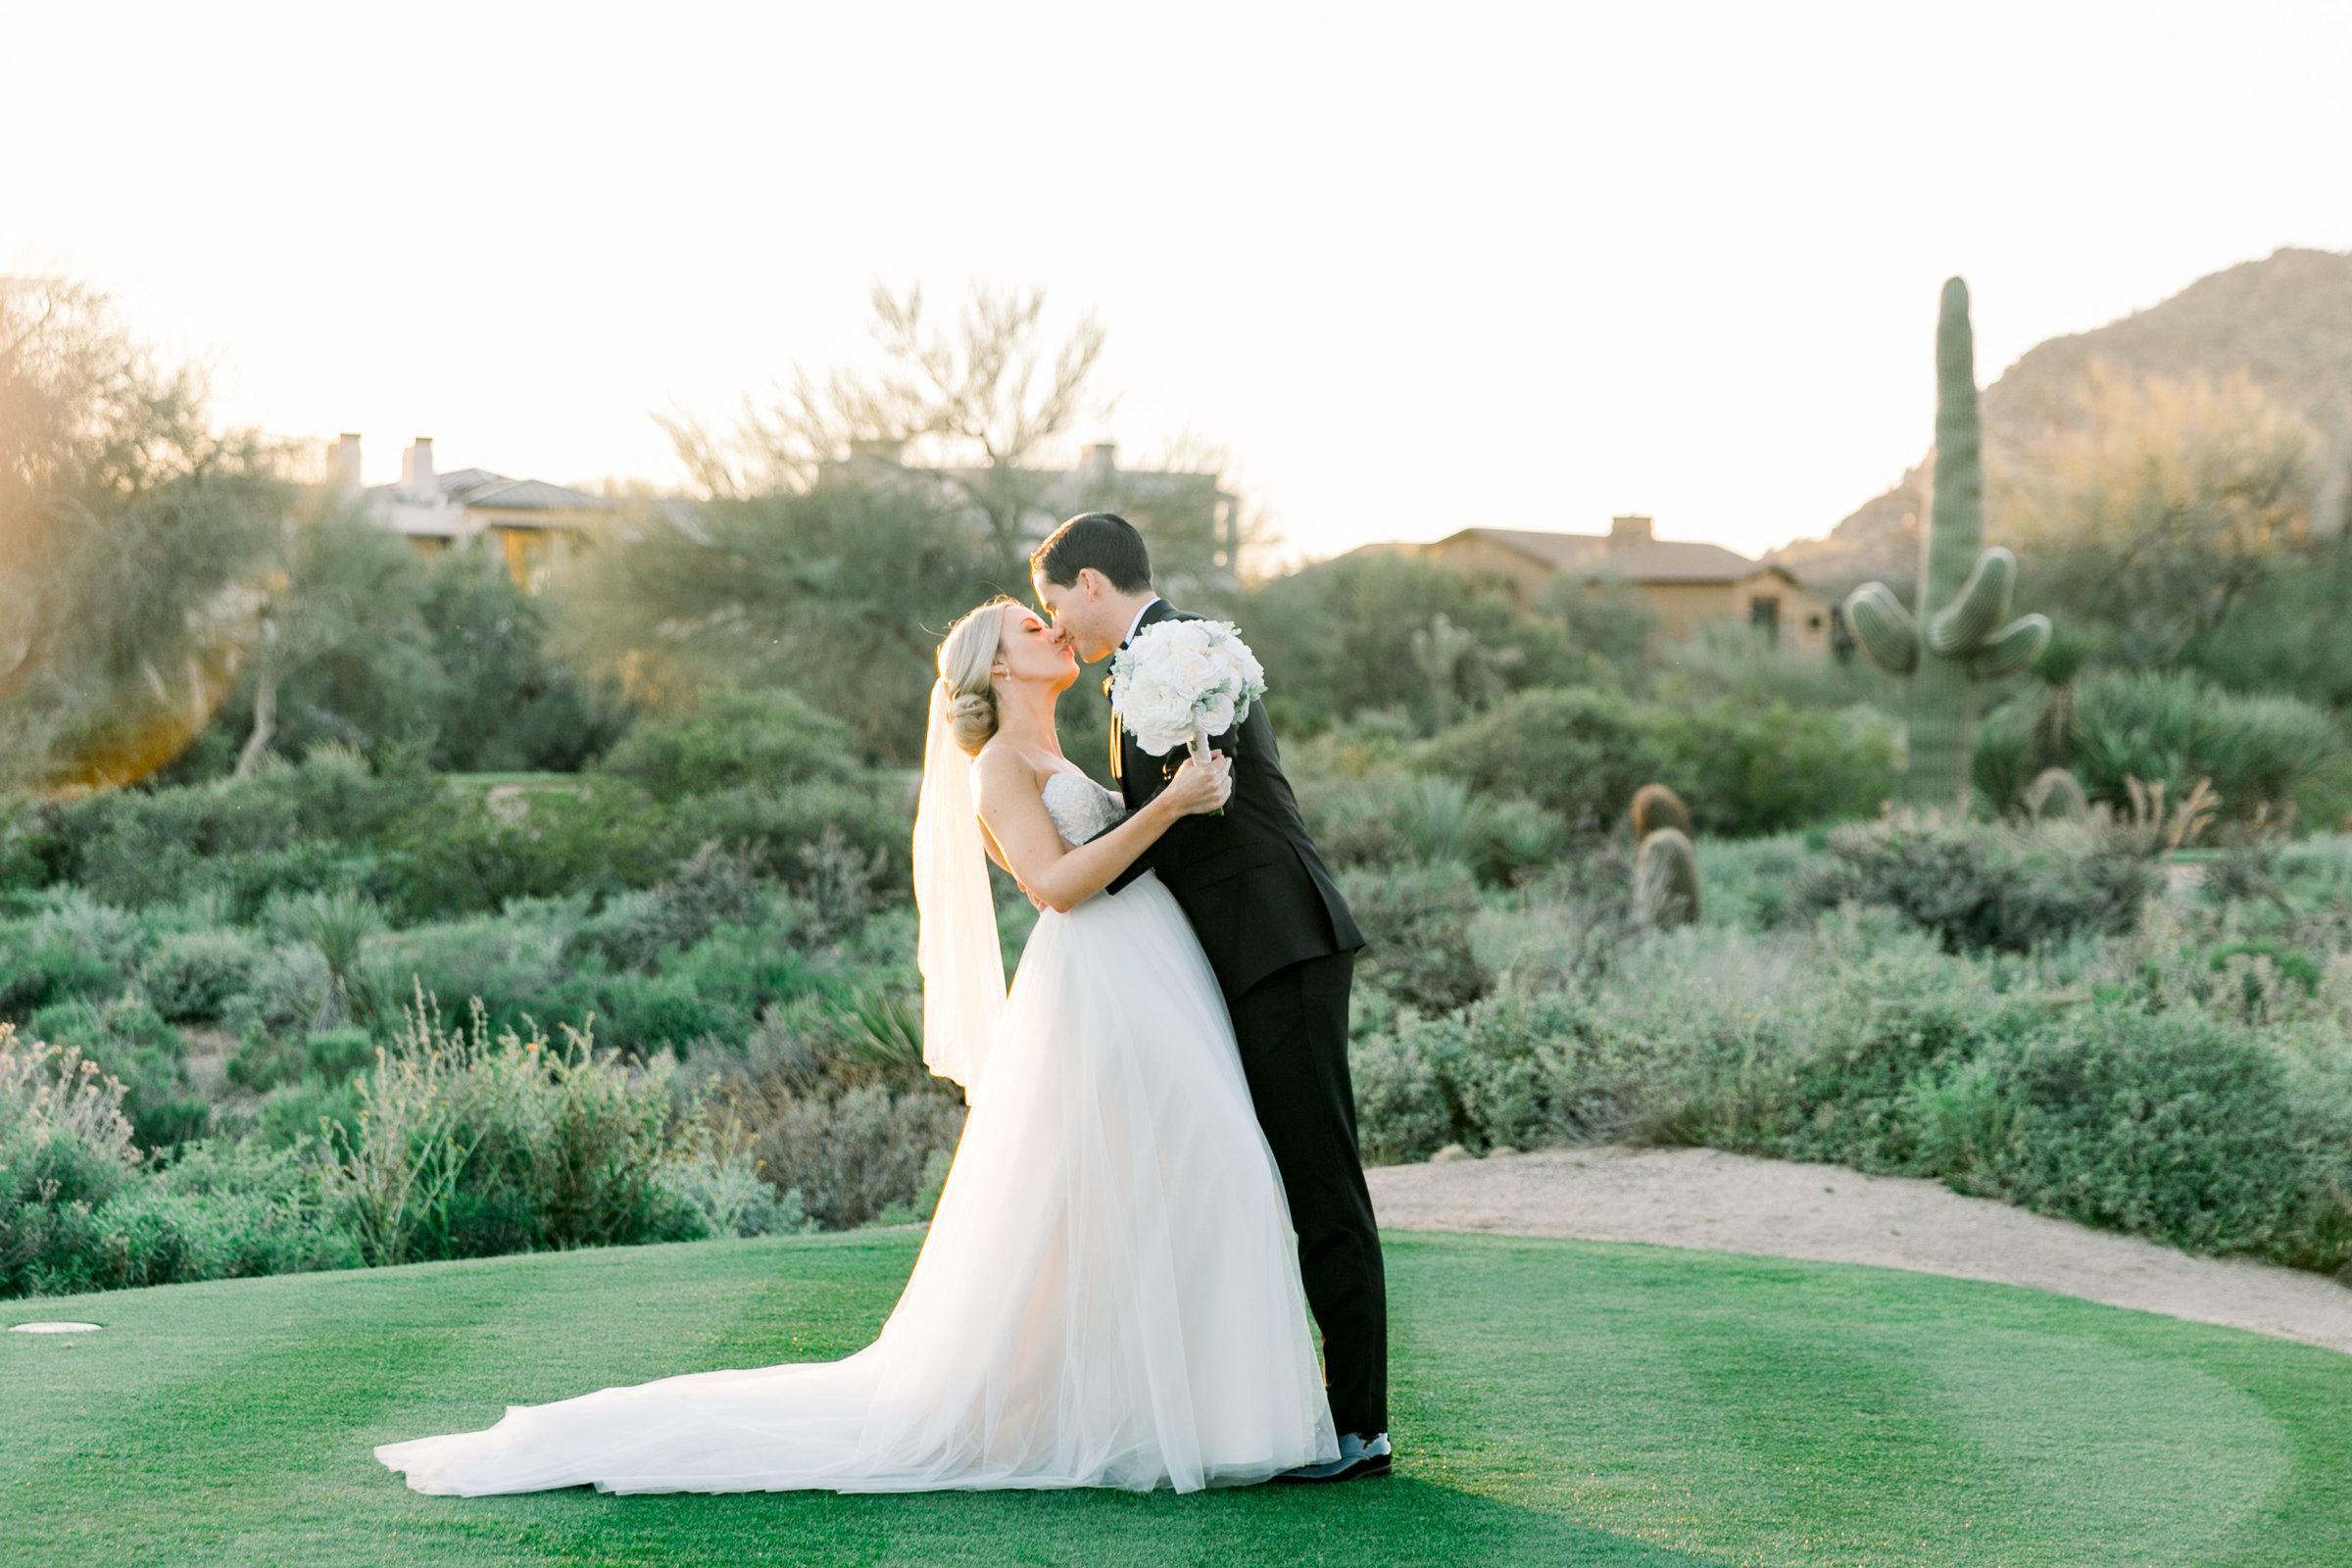 Karlie Colleen Photography - Arizona Wedding at The Troon Scottsdale Country Club - Paige & Shane -698